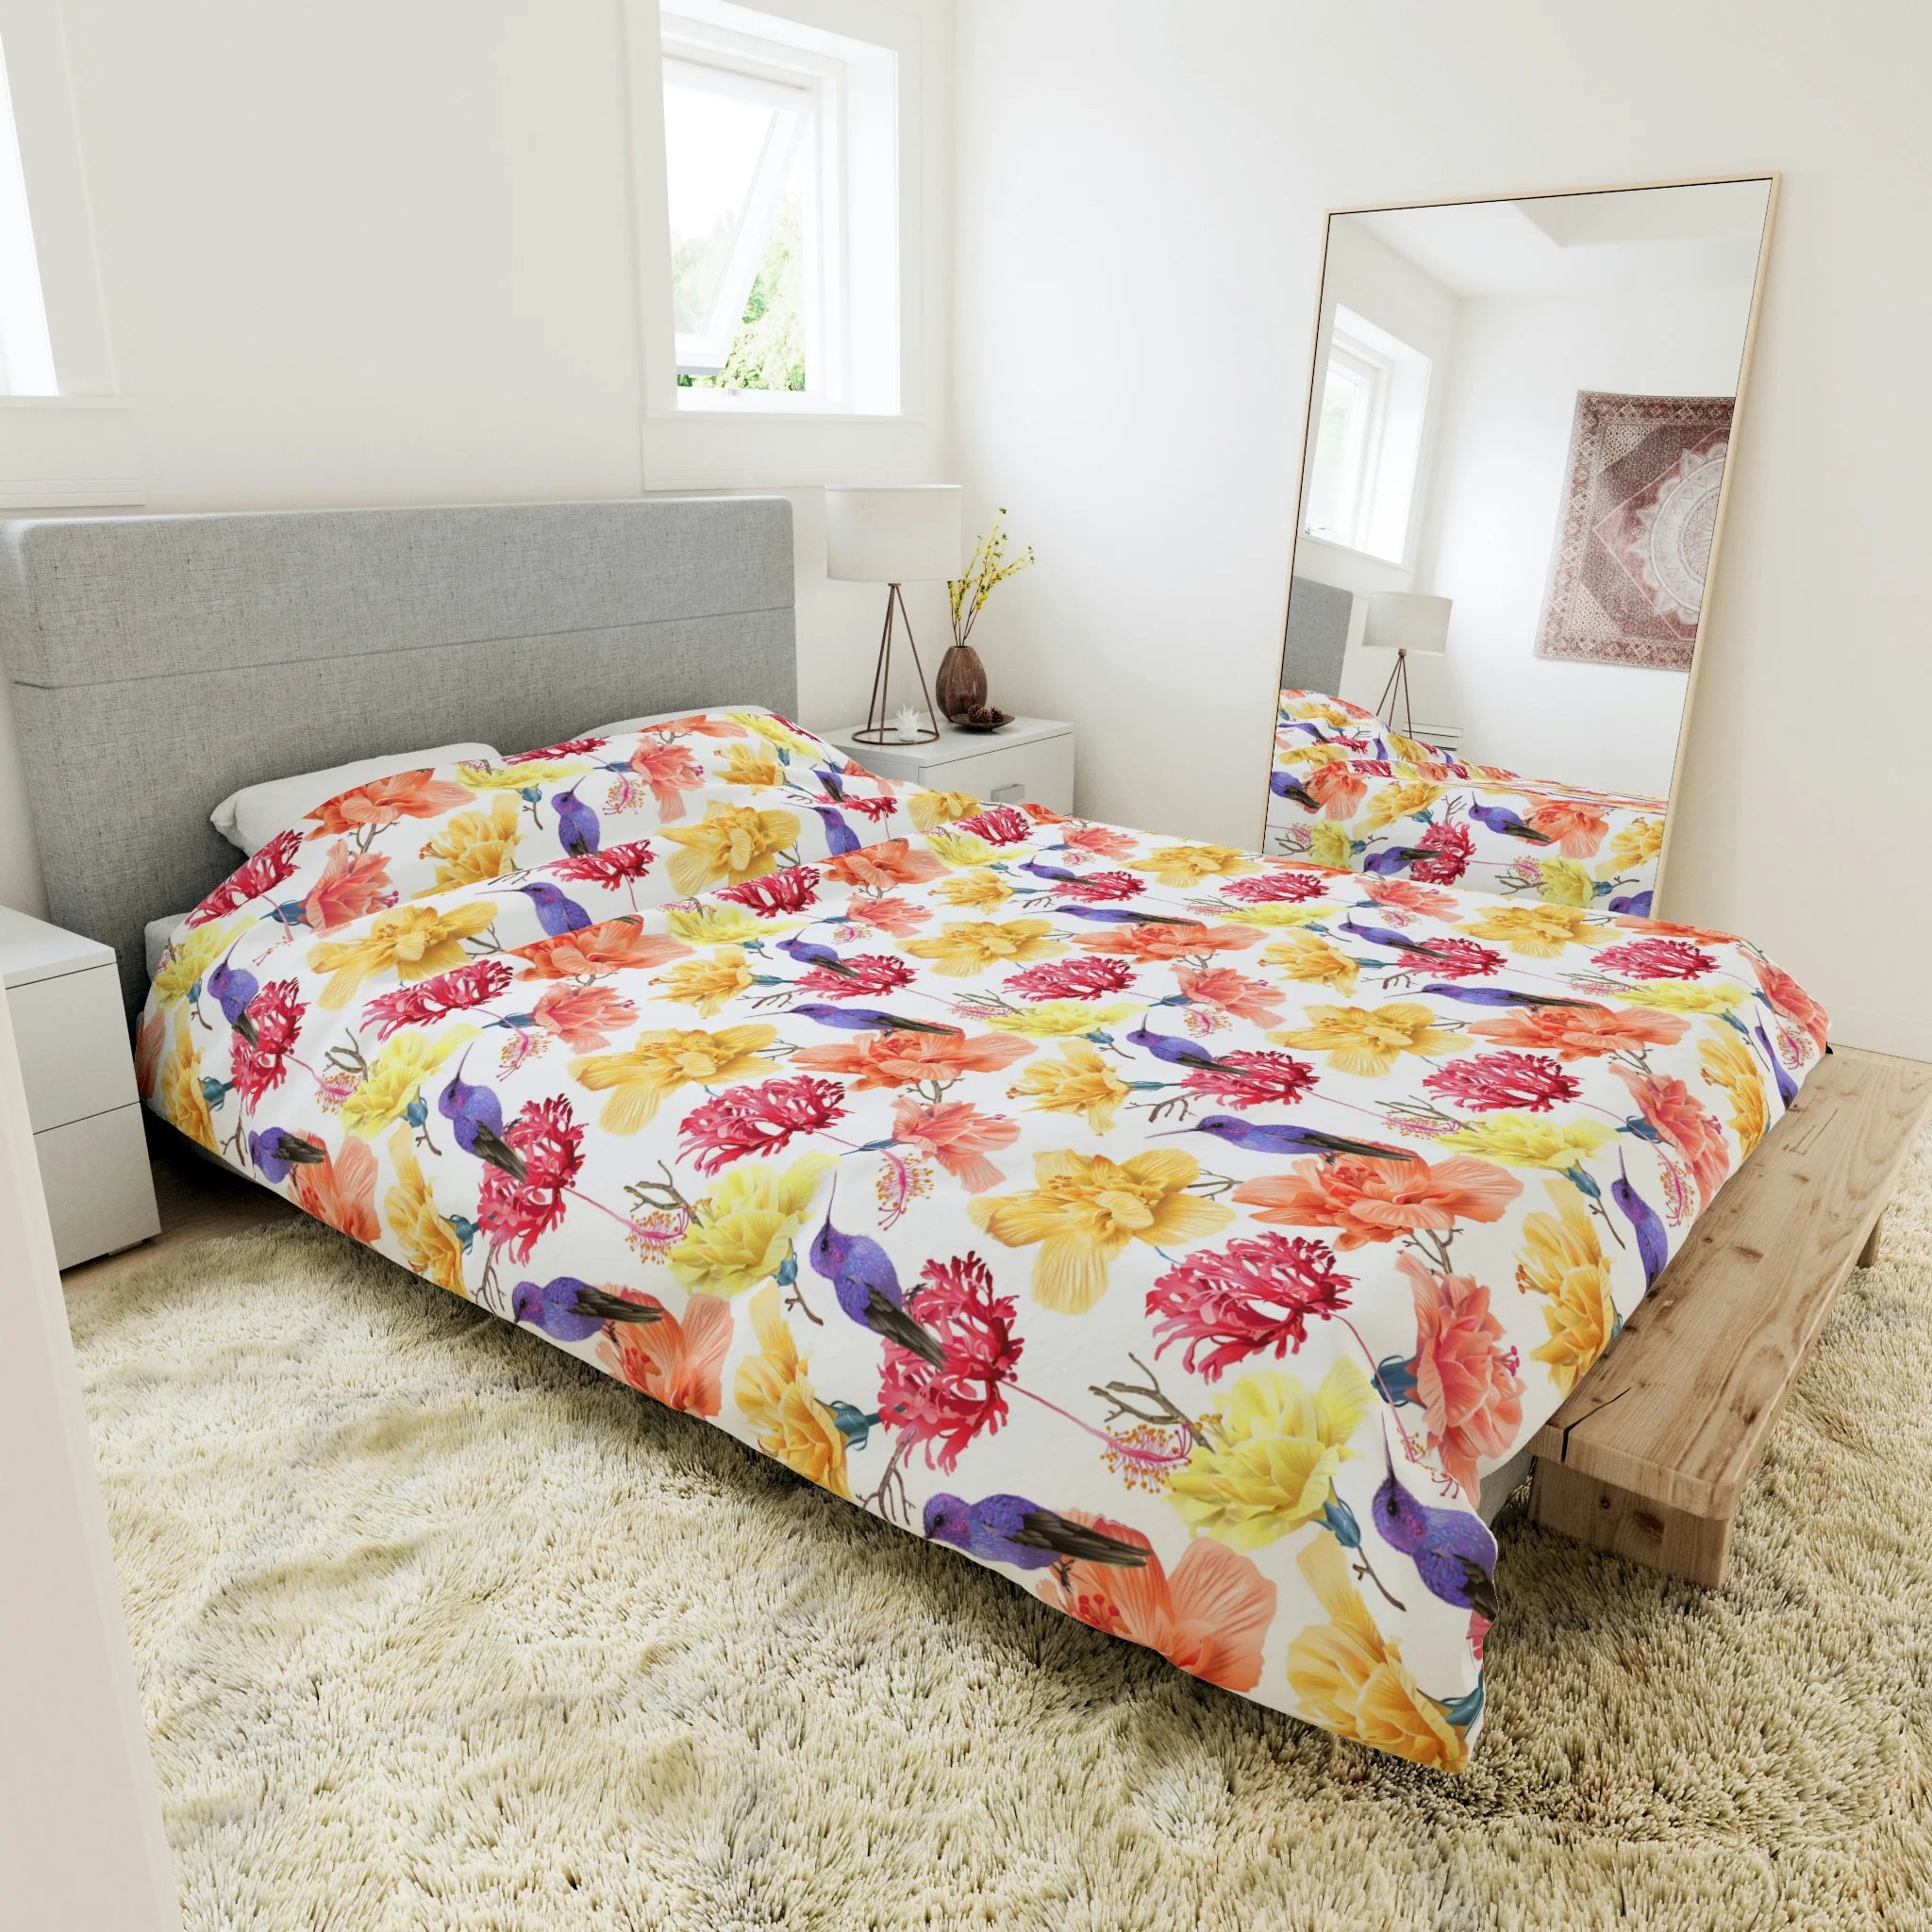 duvet cover with yellow pink and orange flowers on it, floral duvet cover lying on a bed